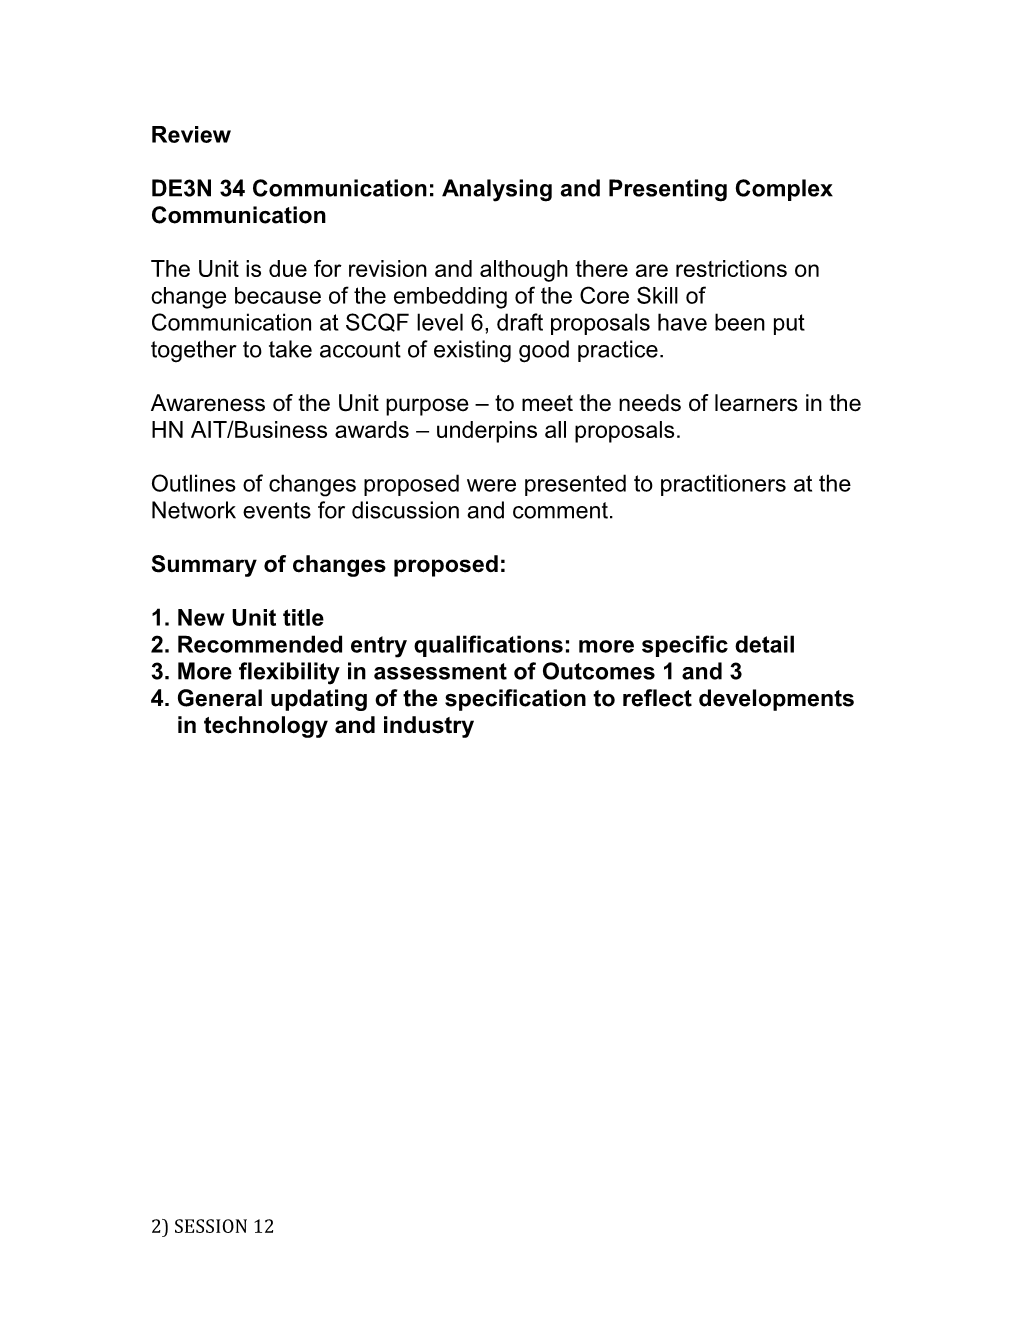 DE3N 34 Communication: Analysing and Presenting Complex Communication